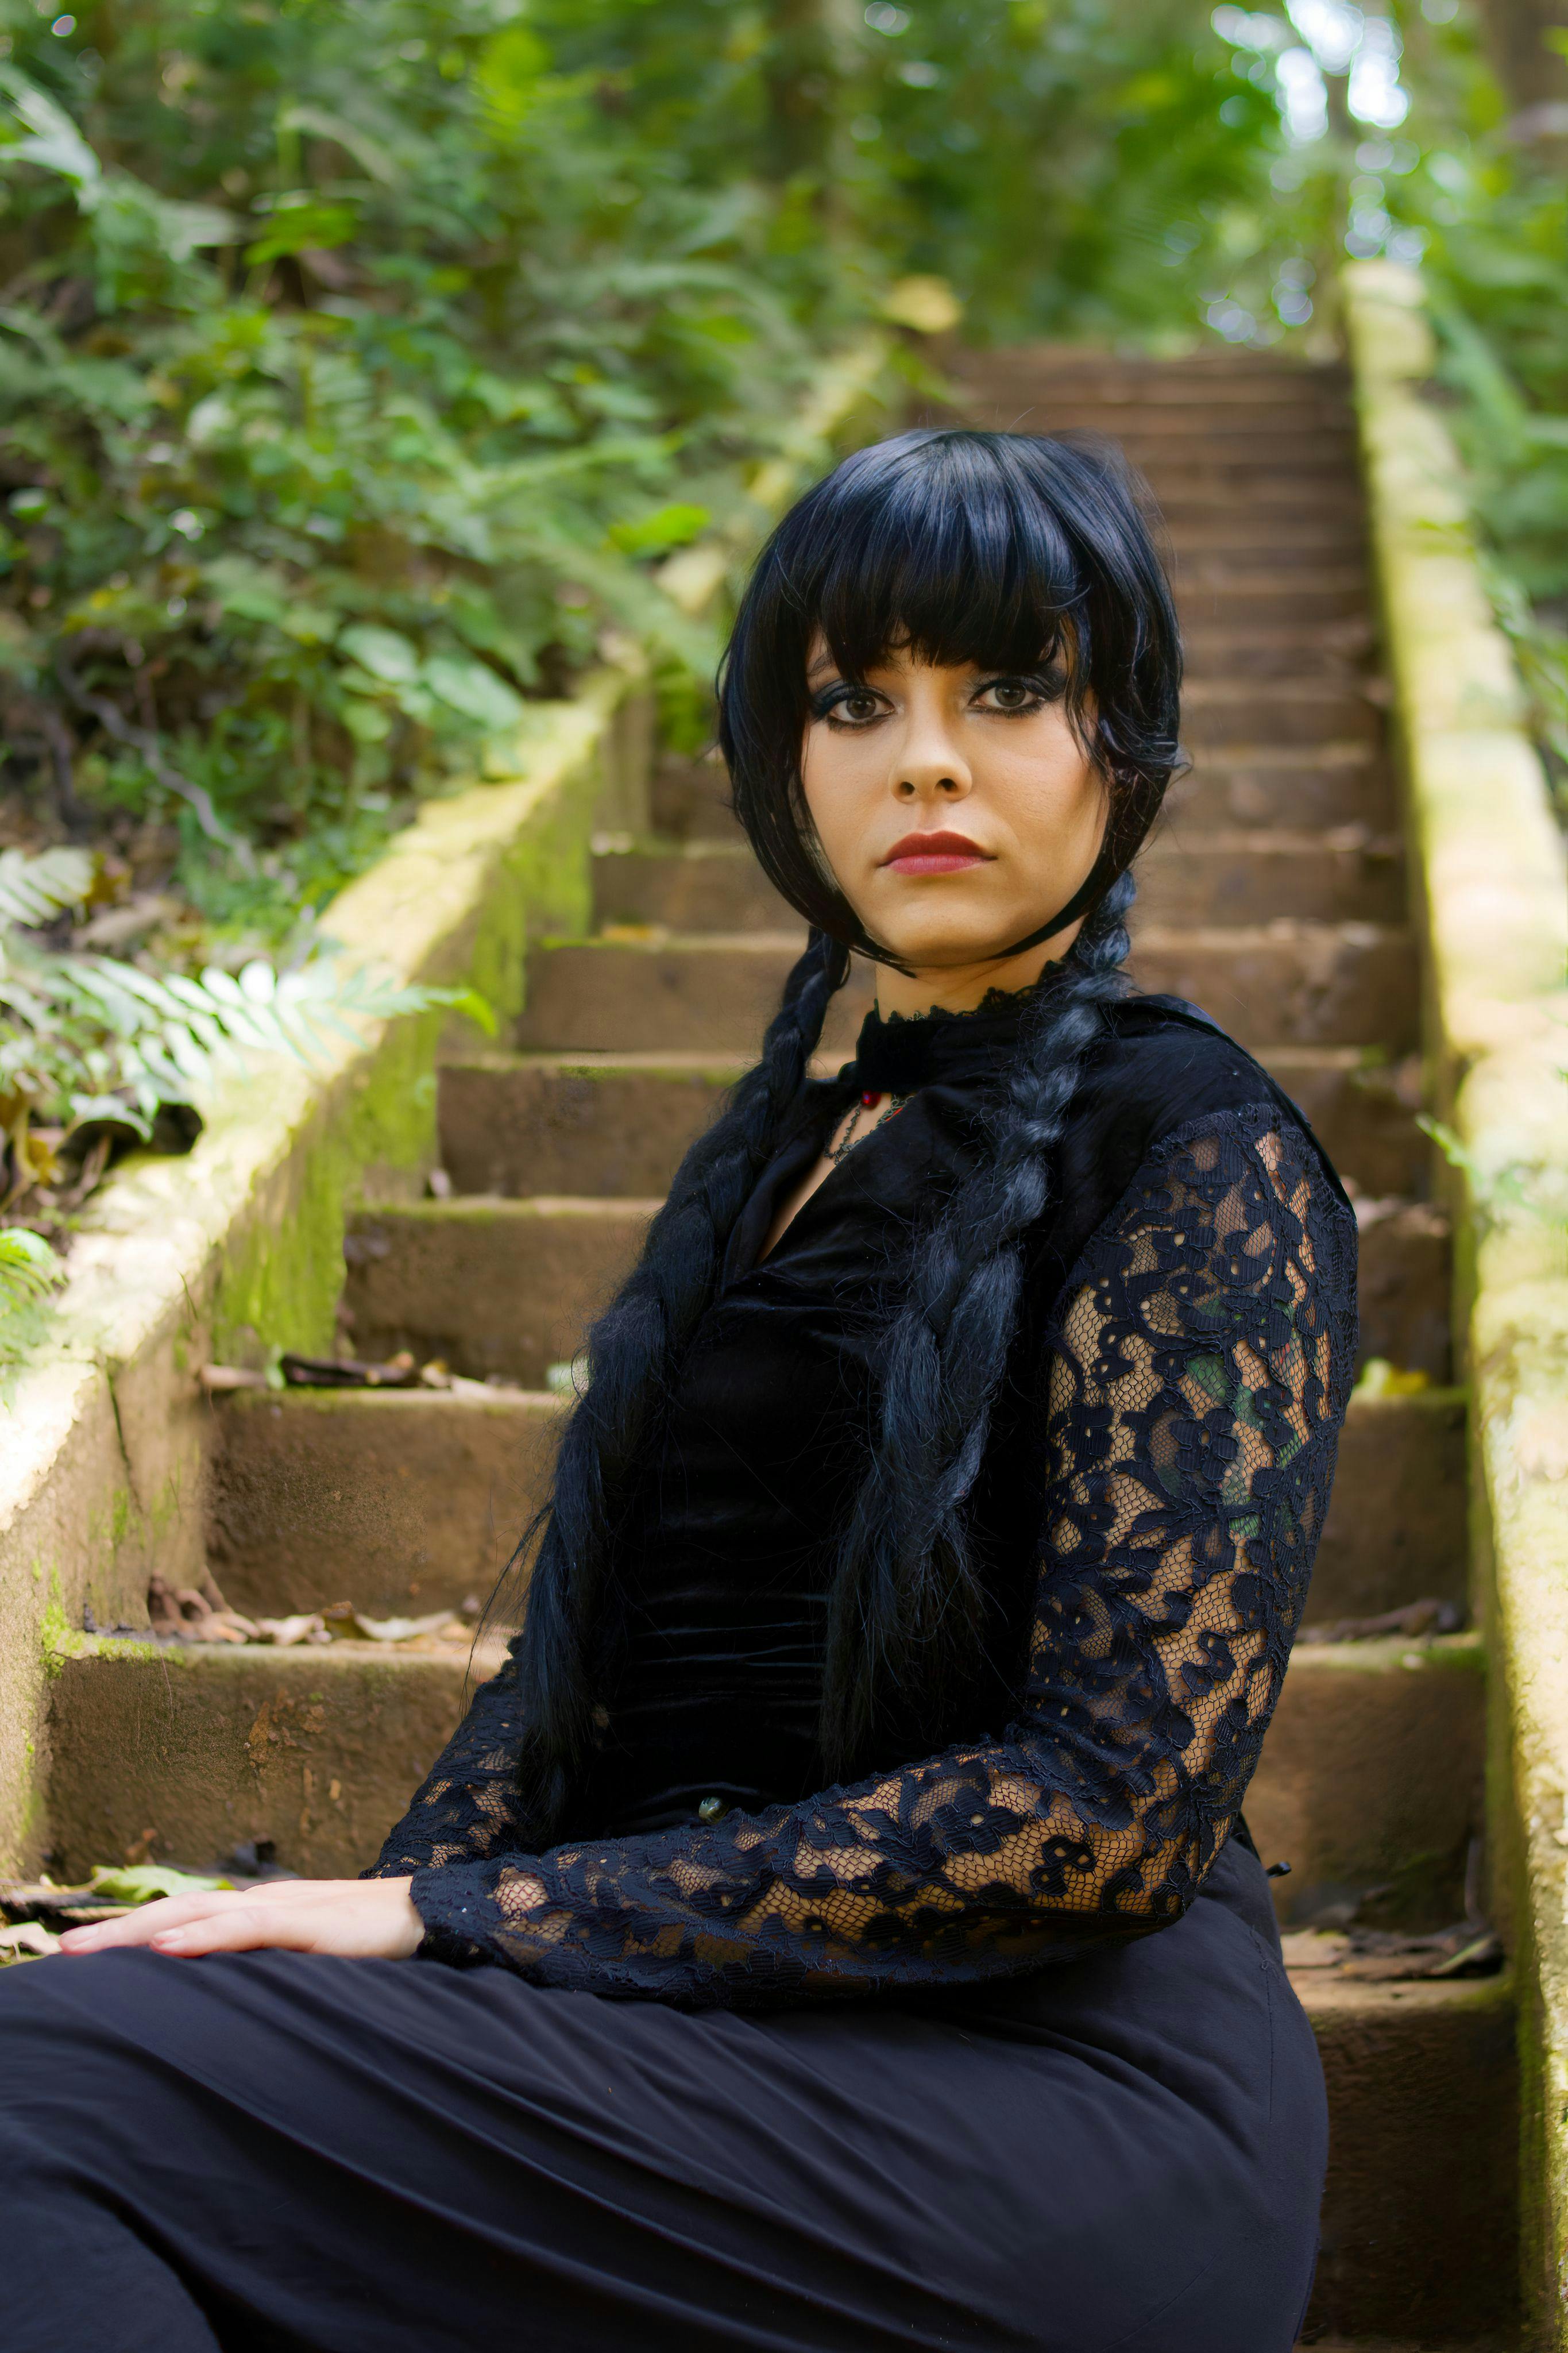 Woman Wearing Dark Clothes Sitting on Stairs in a Park · Free Stock Photo